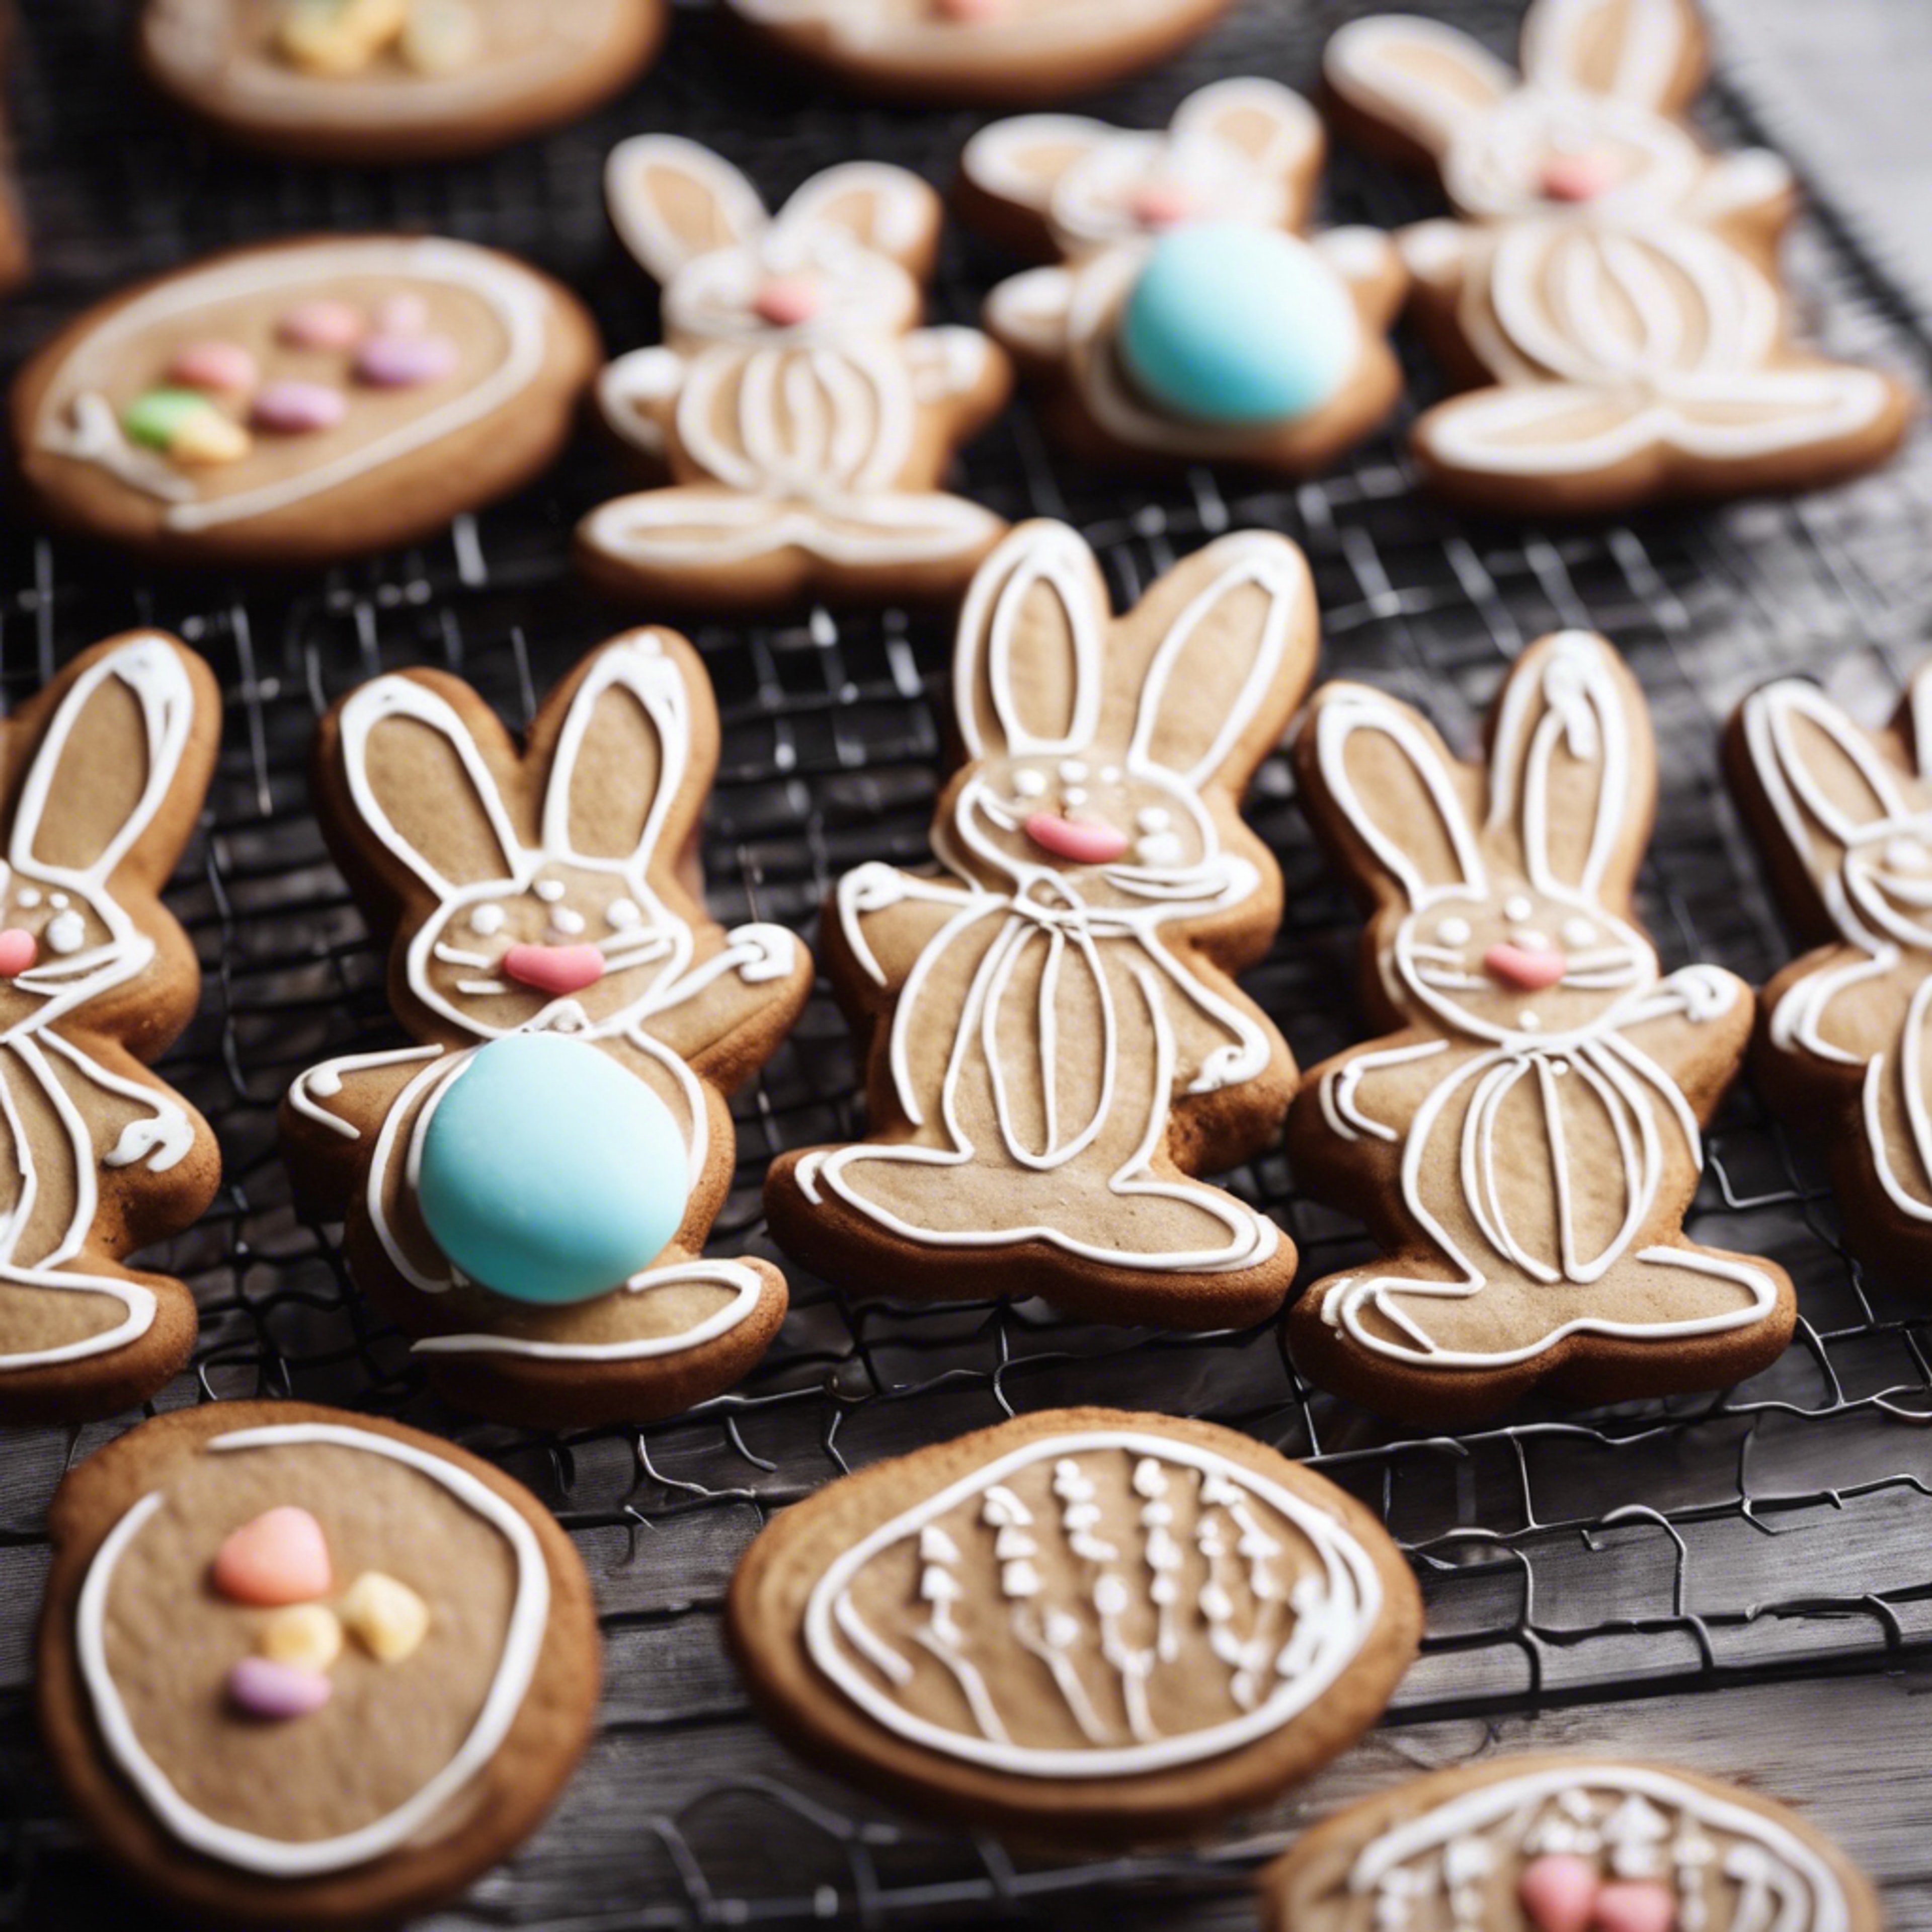 Homemade gingerbread cookies shaped like Easter bunnies and eggs, cooling on a rack. Обои[c62694eb033d400aa62f]